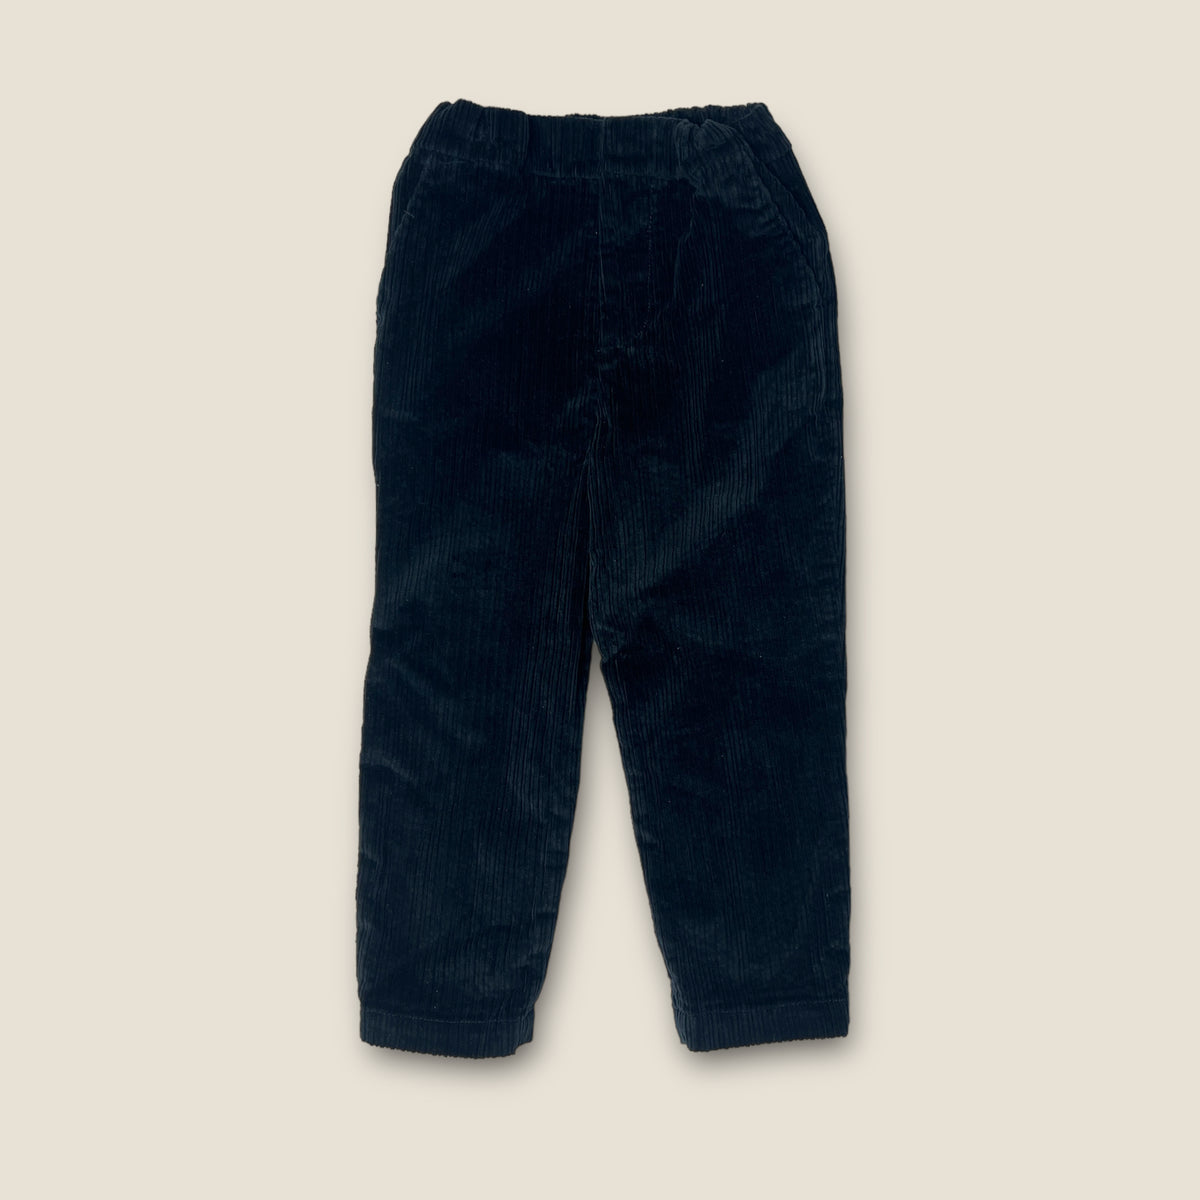 Cos Corduroy Trousers size 2-4 years